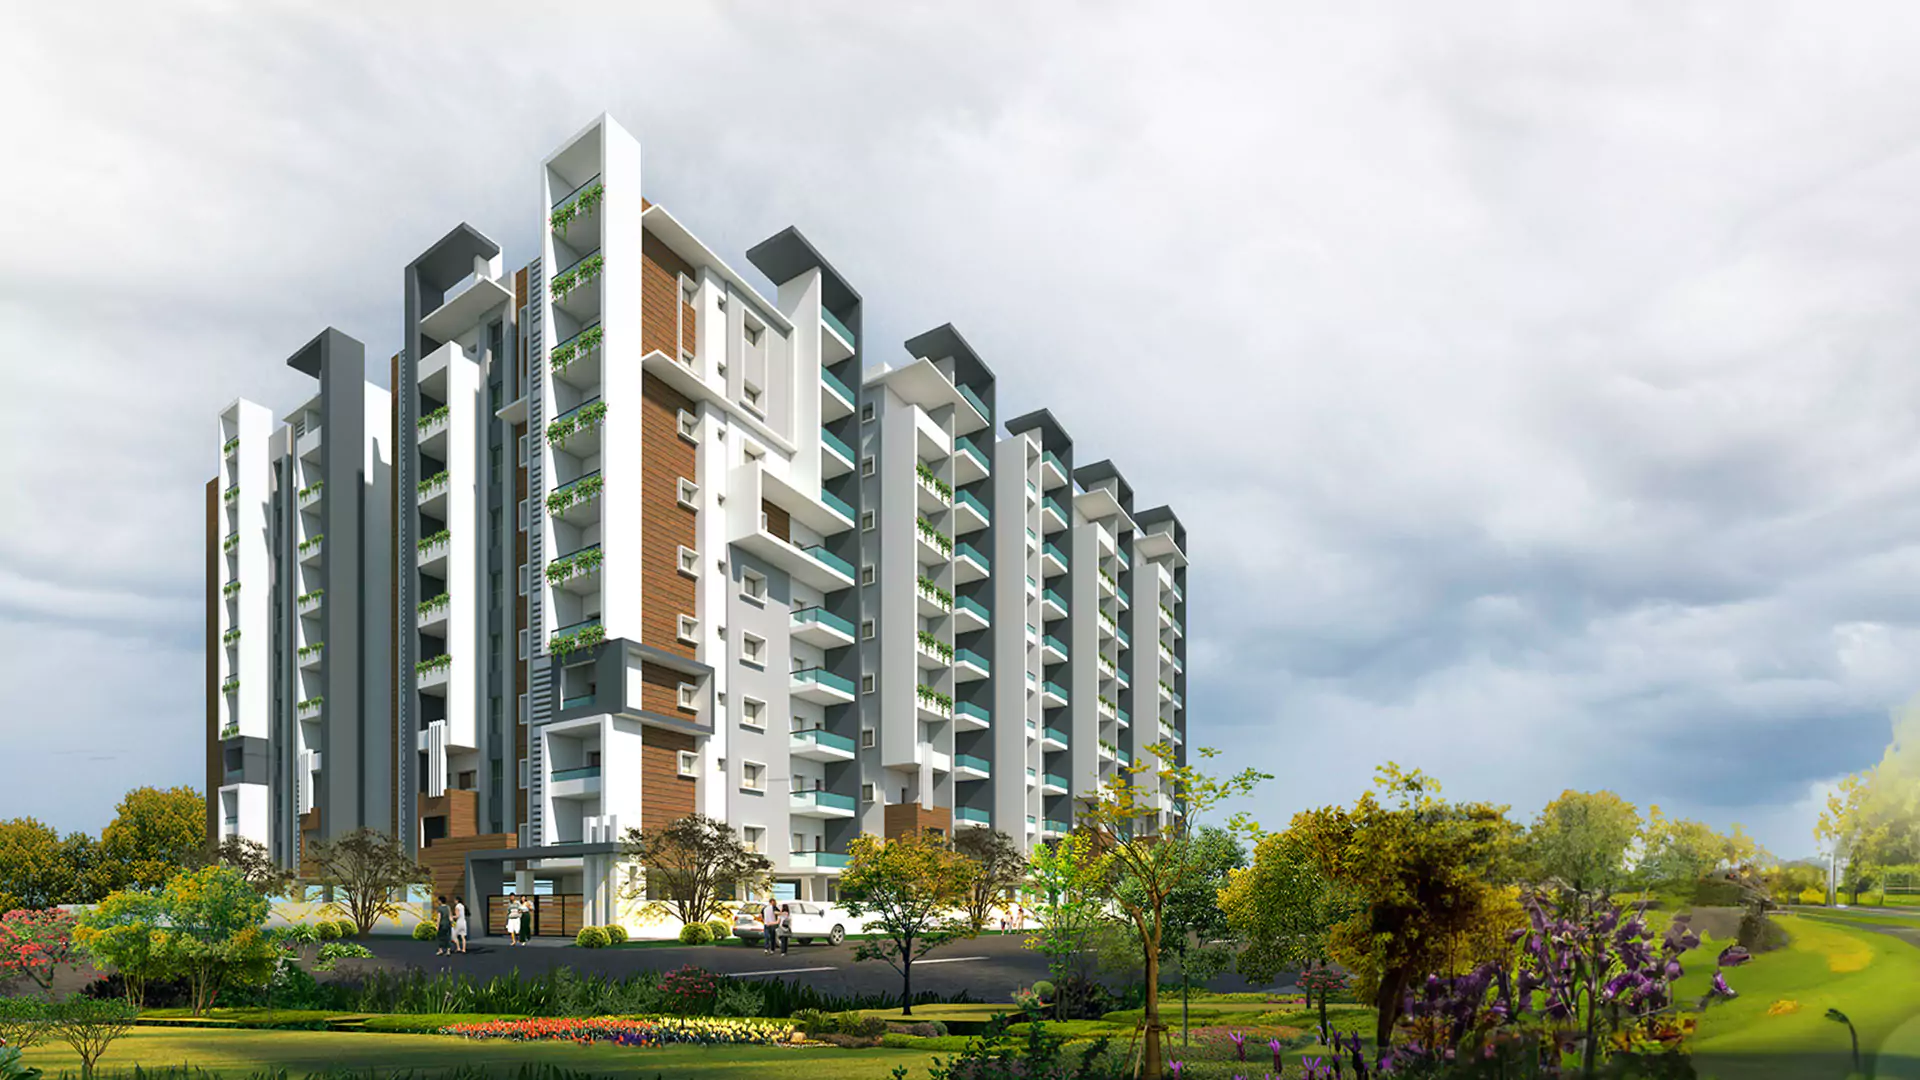 2.5 & 3 BHK homes in Bachupally, Hyderabad